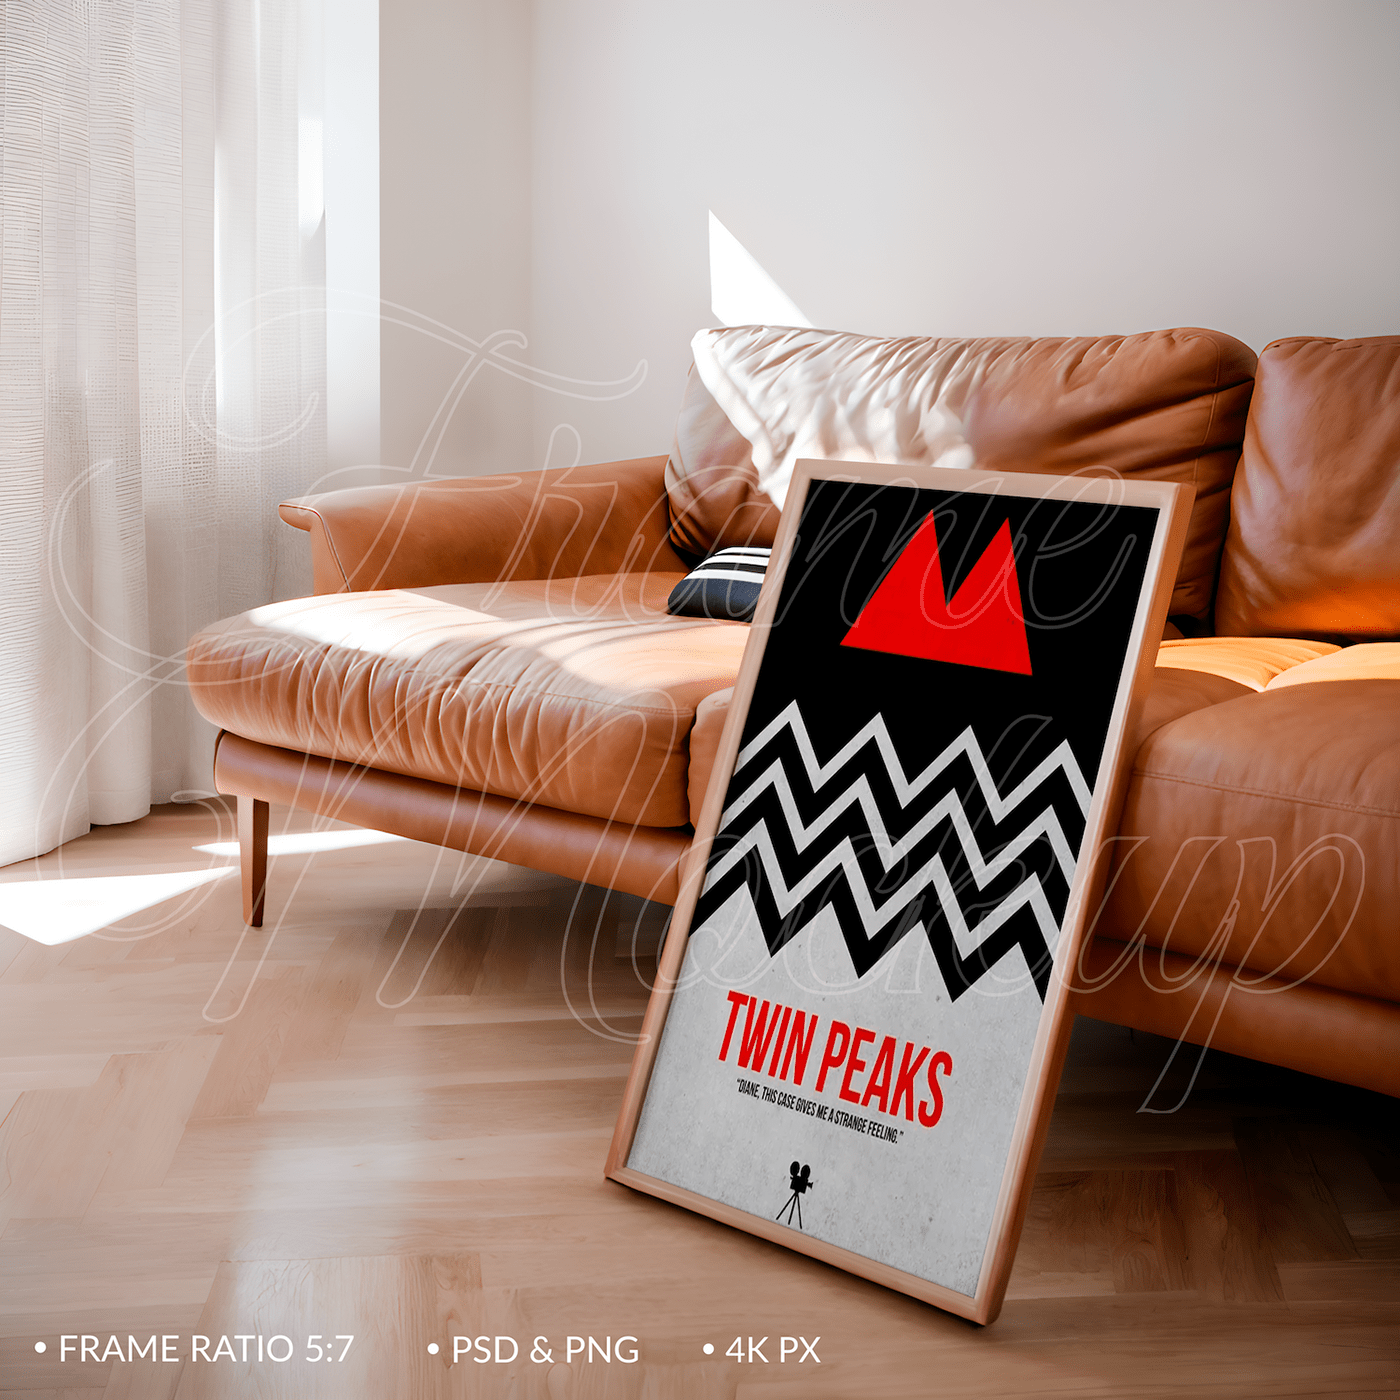 Wall Art Mockup Poster Mockup photoshop mockup poster template frame template graphic design  ILLUSTRATION  Poster Design Digital frame mockup photoshop template